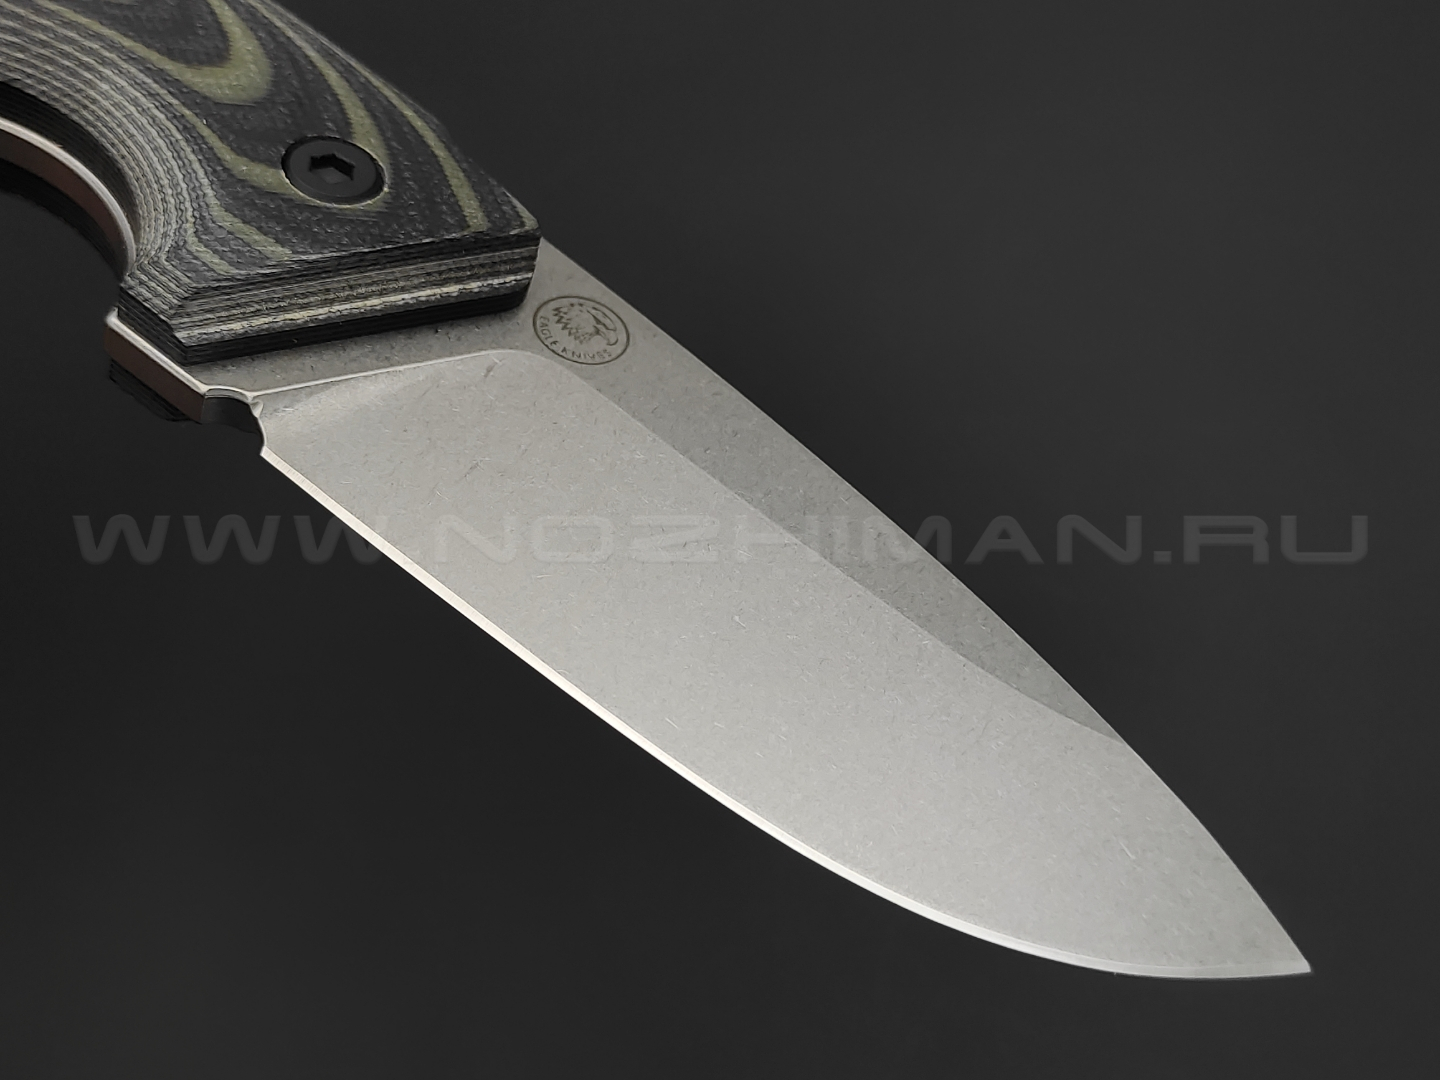 Eagle Knives нож Forester 2 сталь Aus10Co stonewash, рукоять G10 black & green